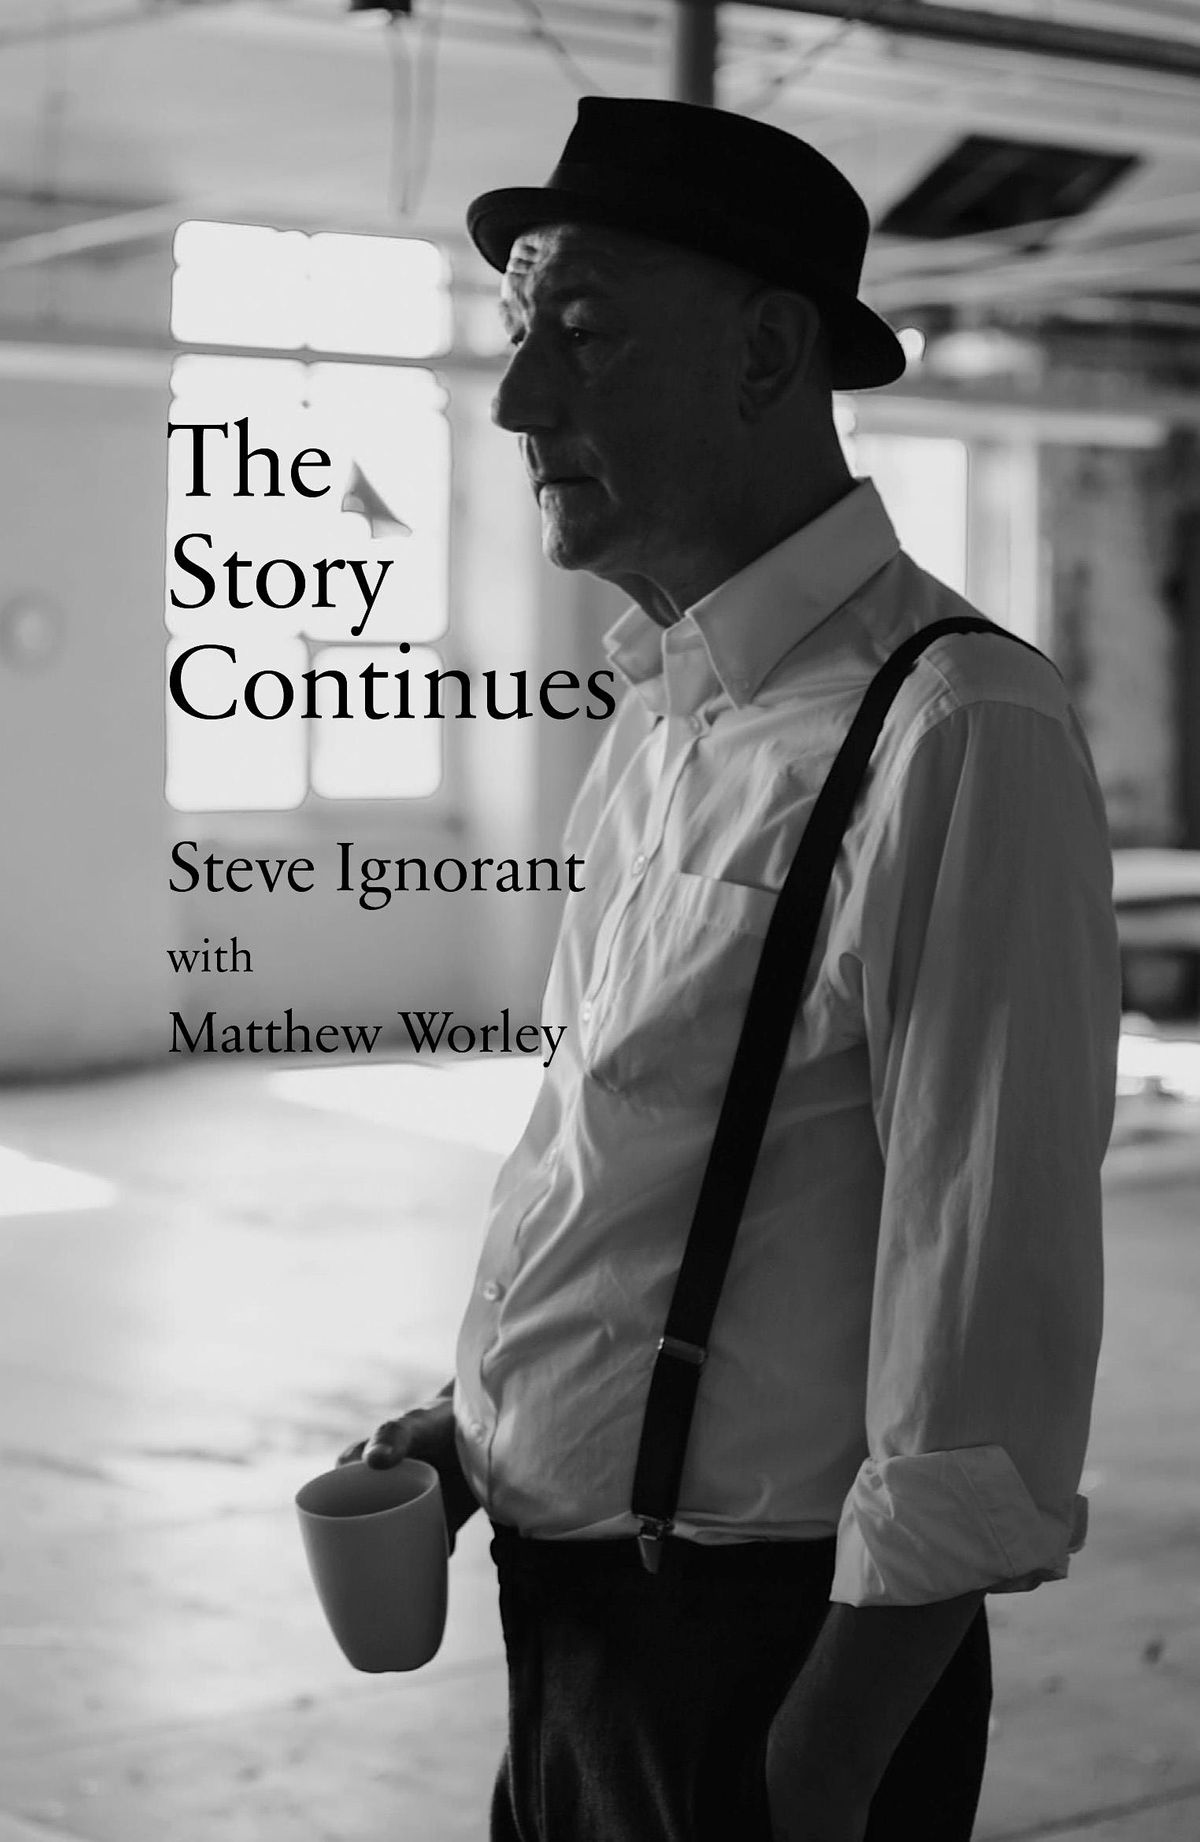 STEVE IGNORANT IN CONVERSATION: THE STORY CONTINUES